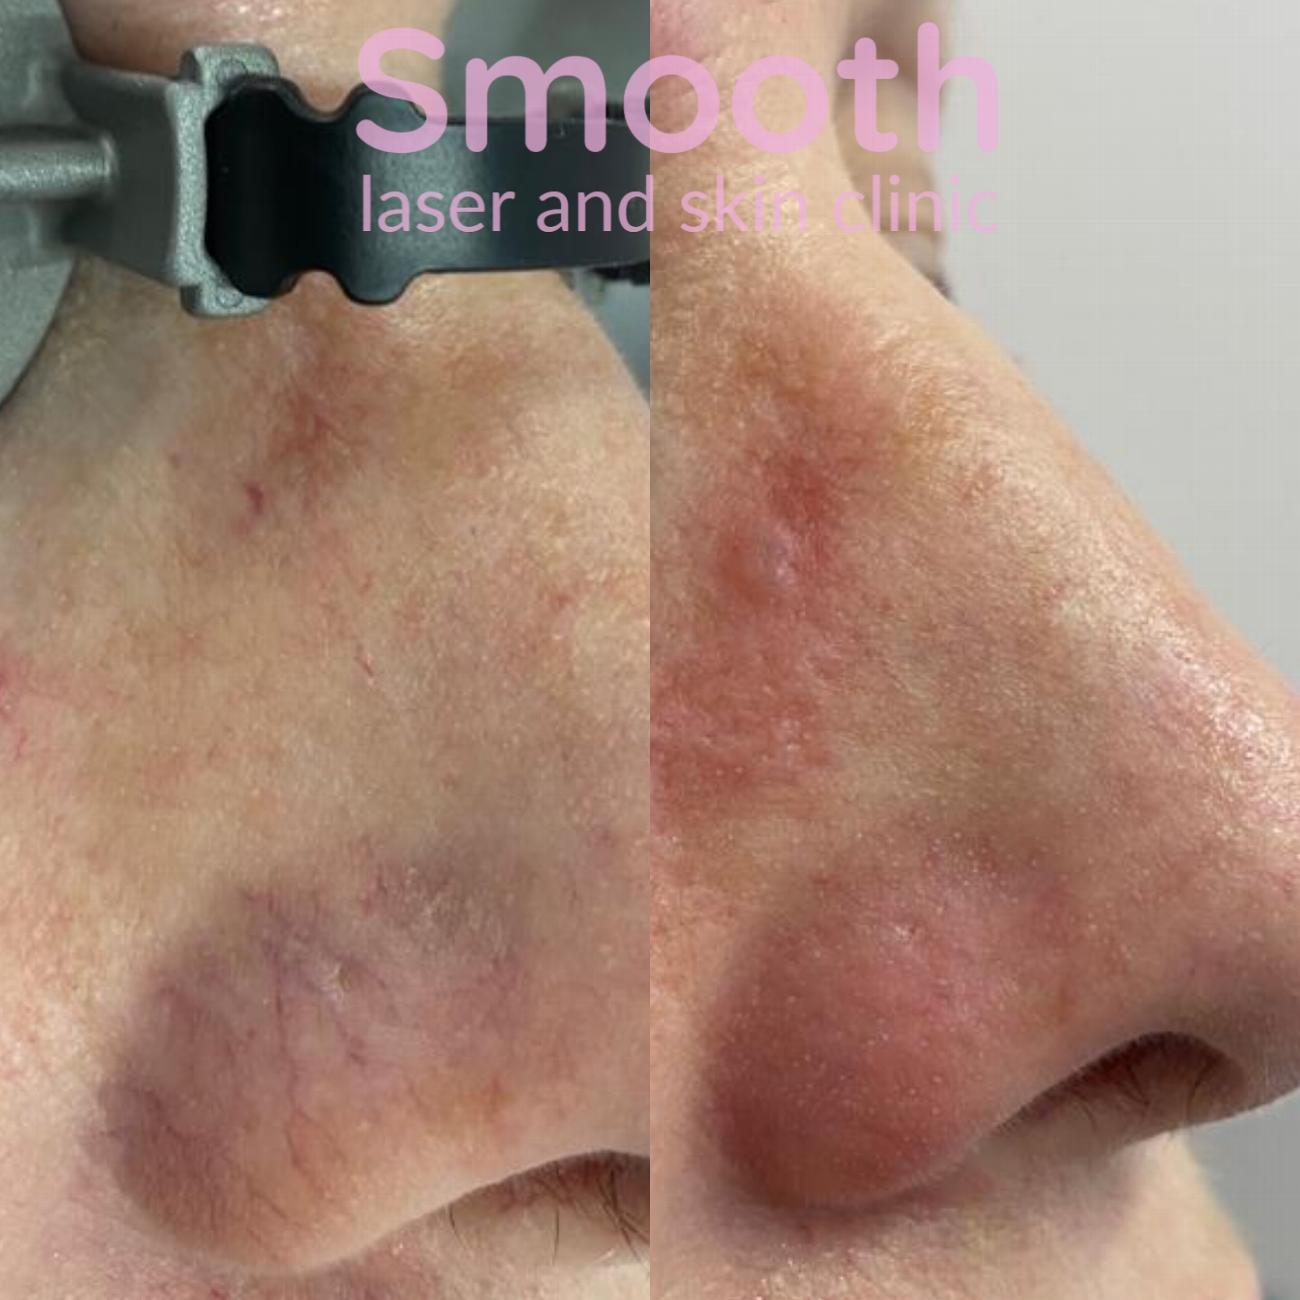 Better Skin in Burton-on-Trent | Smooth Laser and Skin Clinic gallery image 9